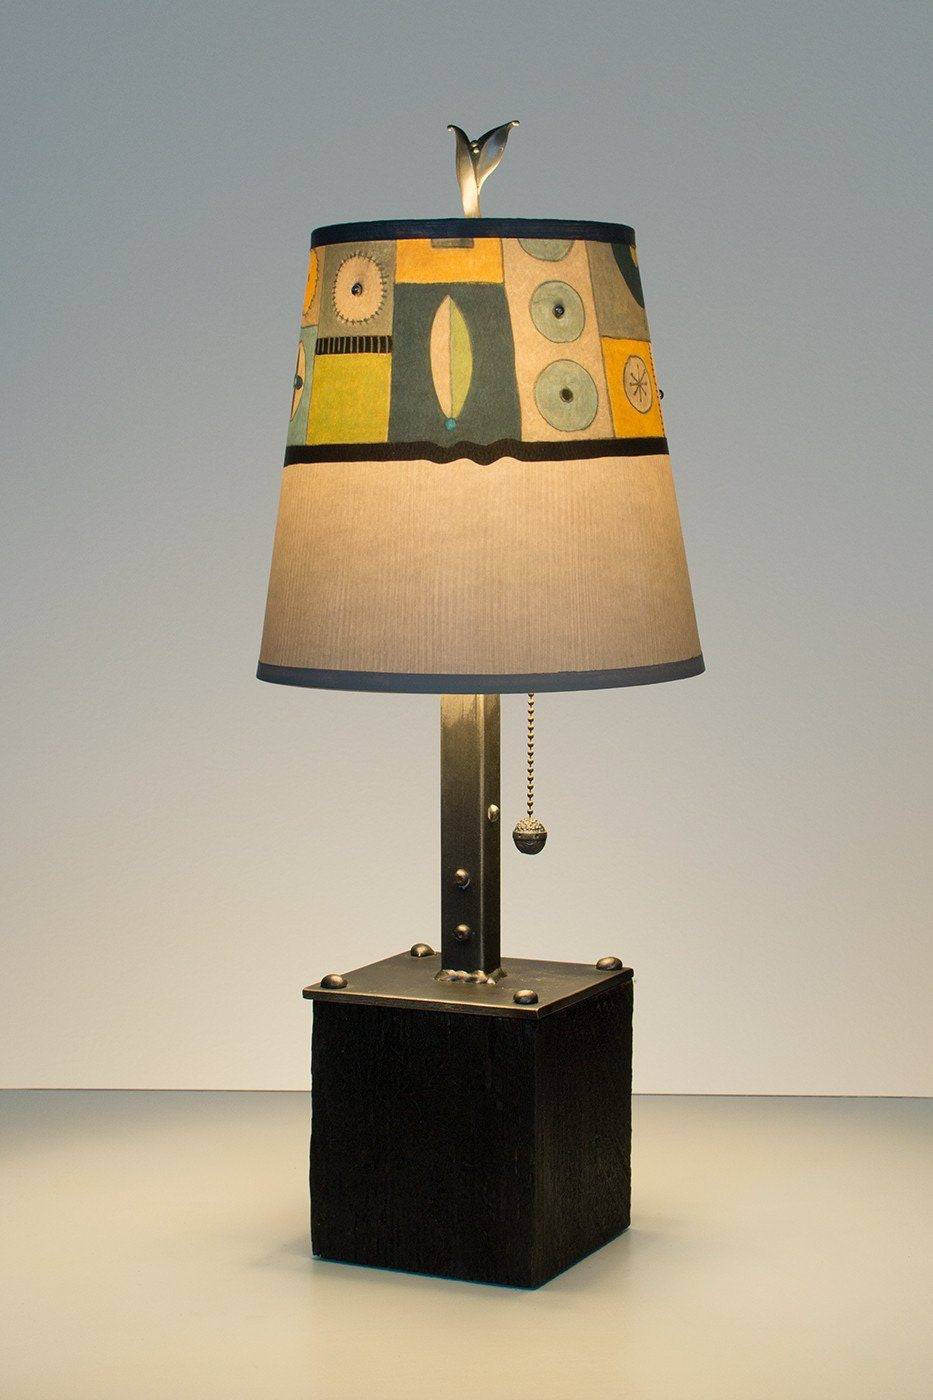 Janna Ugone & Co Table Lamps Steel Table Lamp on Reclaimed Wood with Small Drum Shade in Lucky Mosaic Oyster